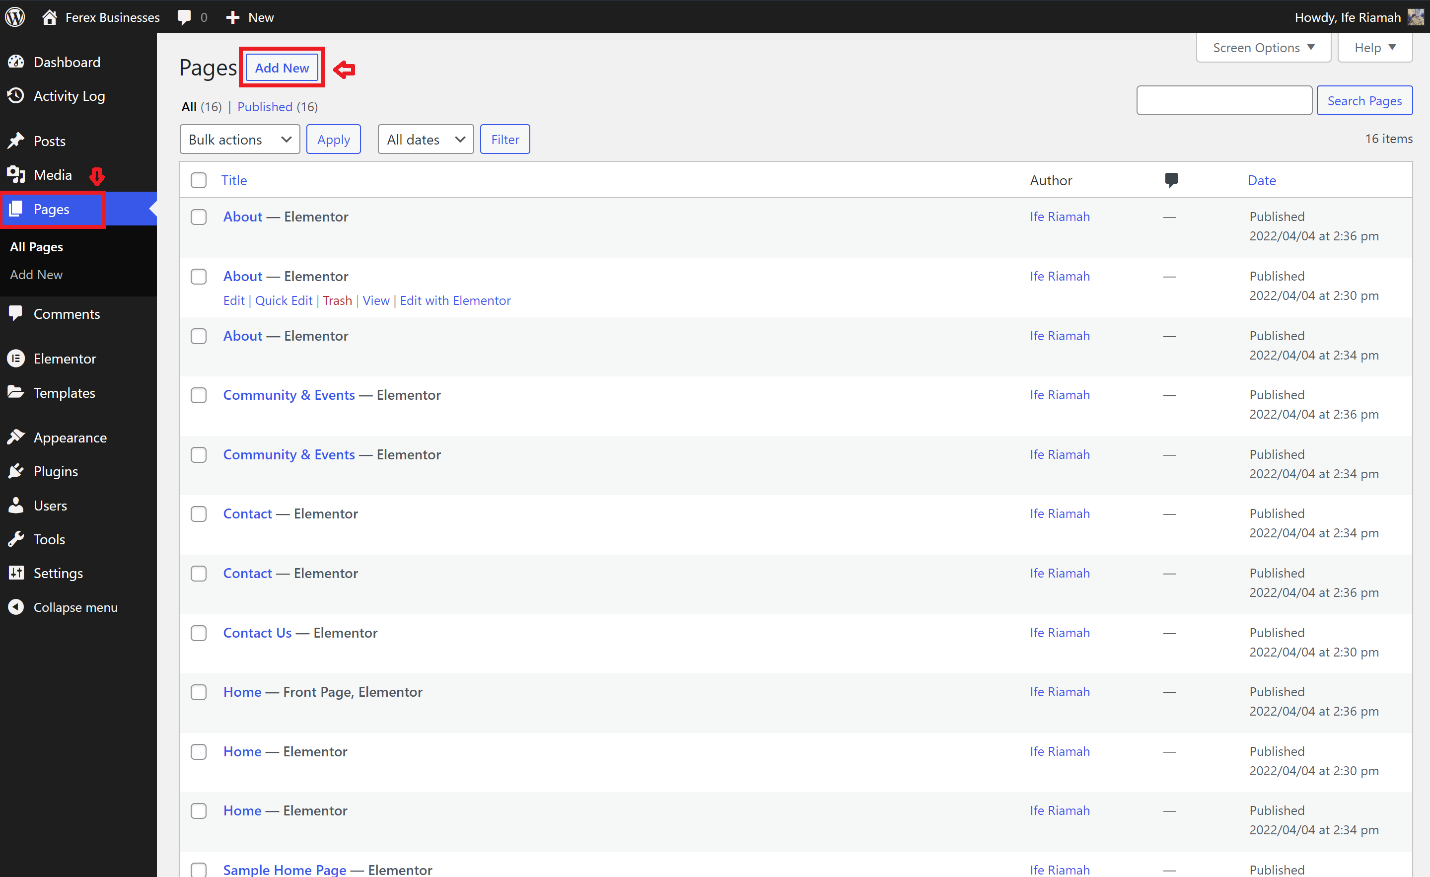 Screenshot of the WordPress dashboard. The "Pages" and "Add New" buttons are highlighted in red boxes.